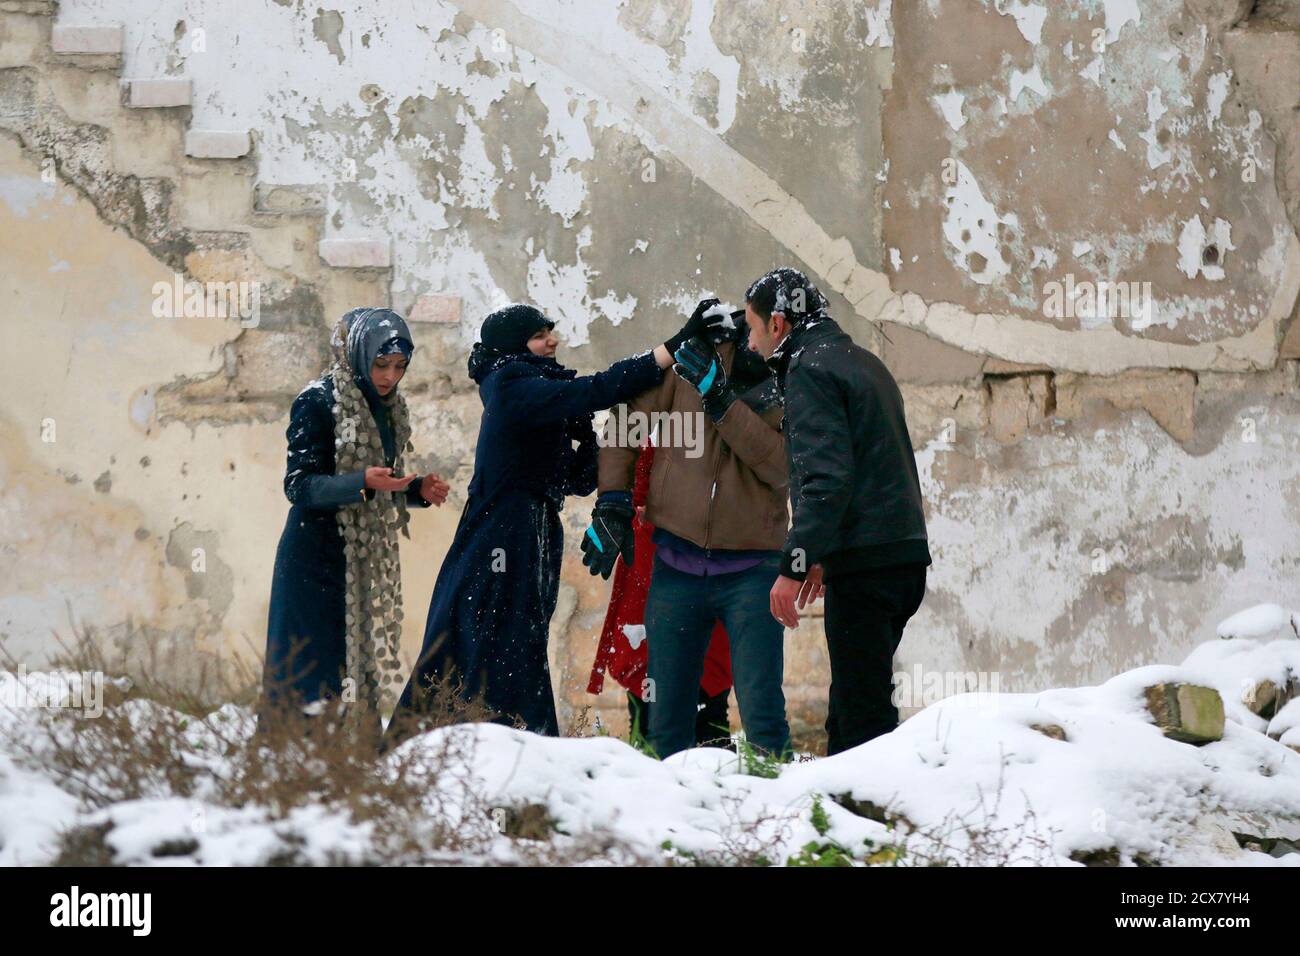 Residents play with snow in Aleppo January 11, 2015. A storm buffeted the  Middle East with blizzards, rain and strong winds, keeping people at home  across much of the region and raising